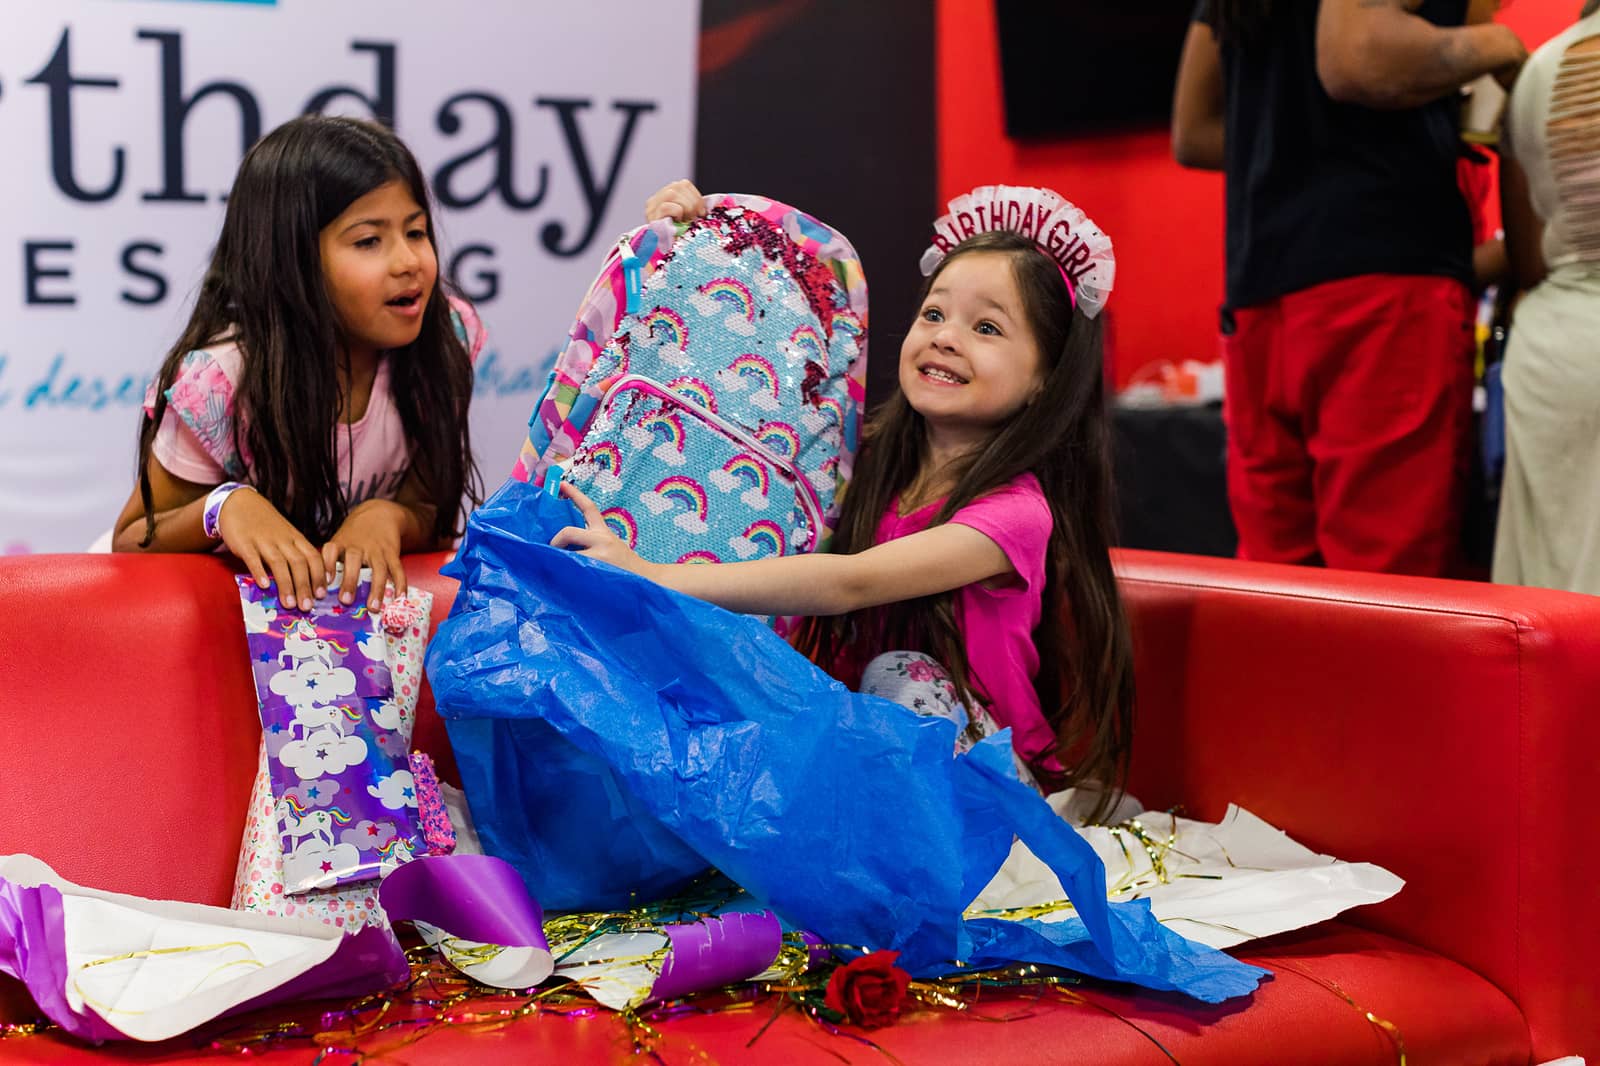 Birthday Girl smiling with joy as she opens up her presents at Birthday Blessing Event